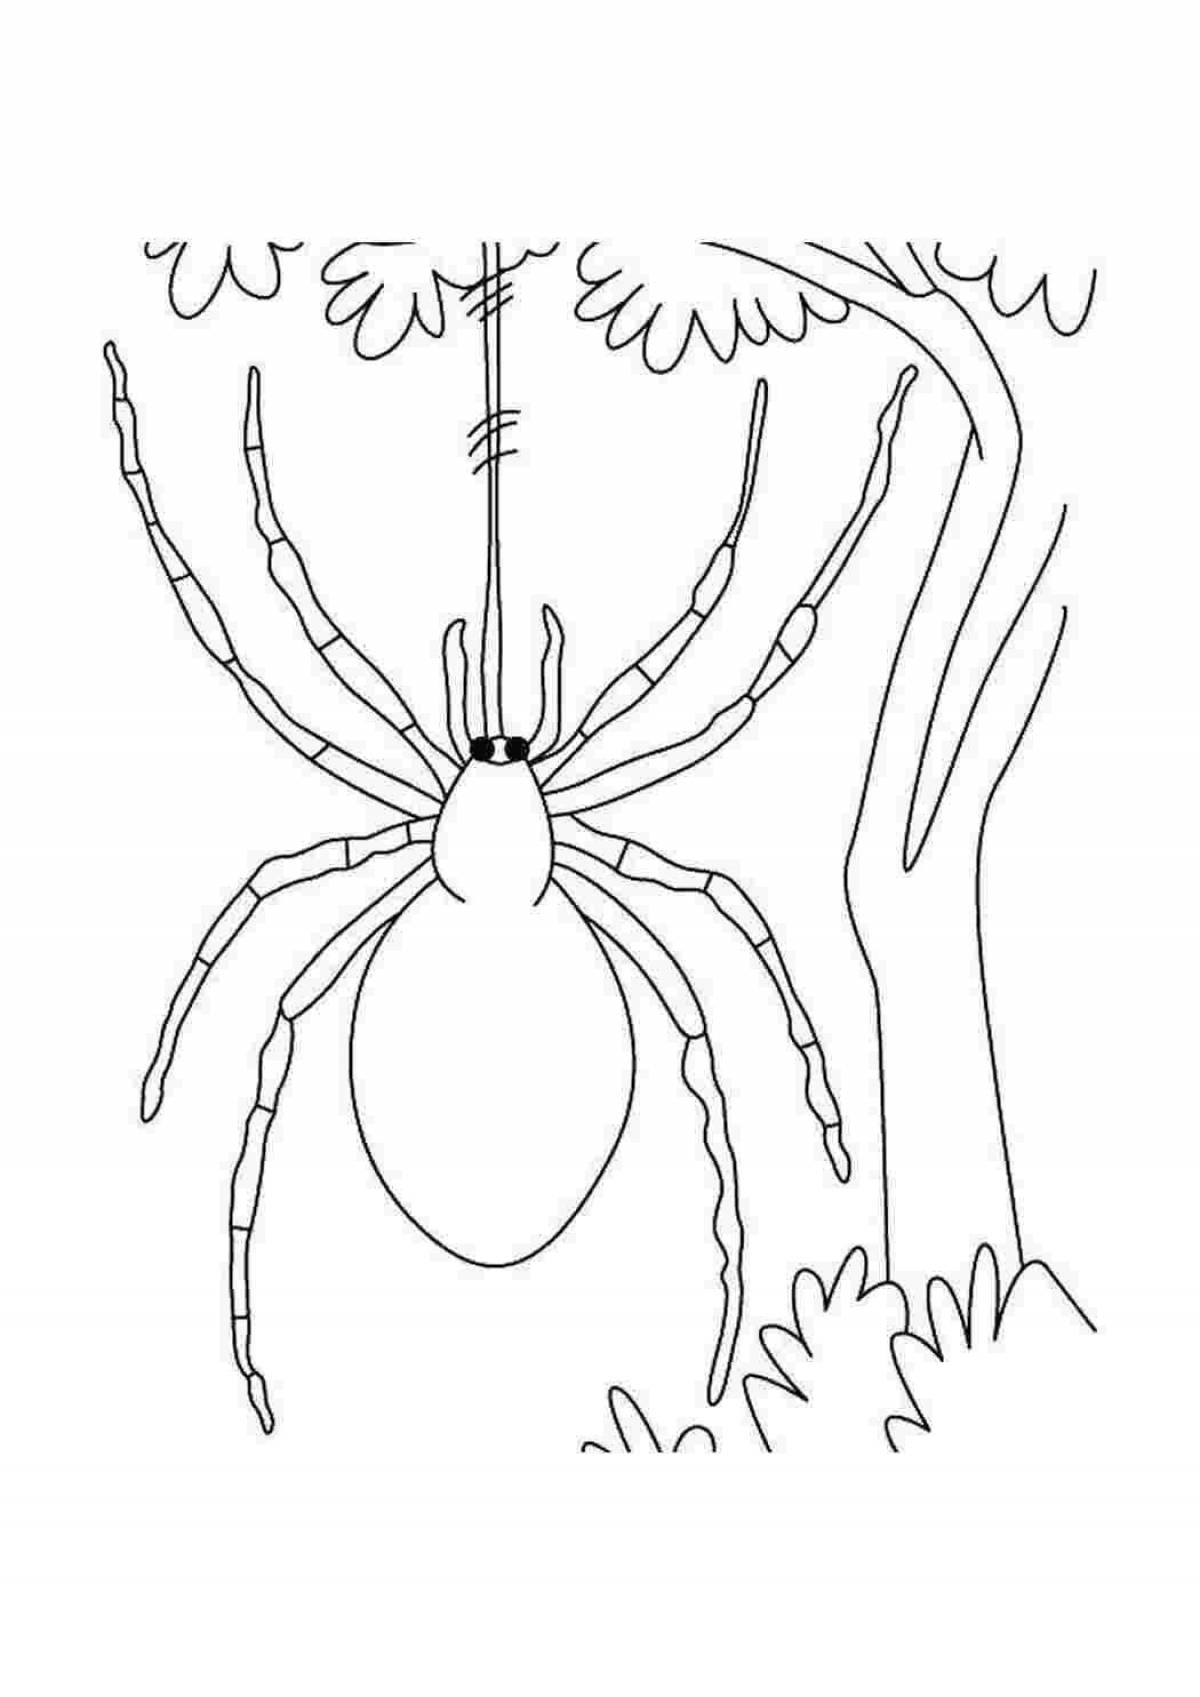 Coloring book glowing spider for students